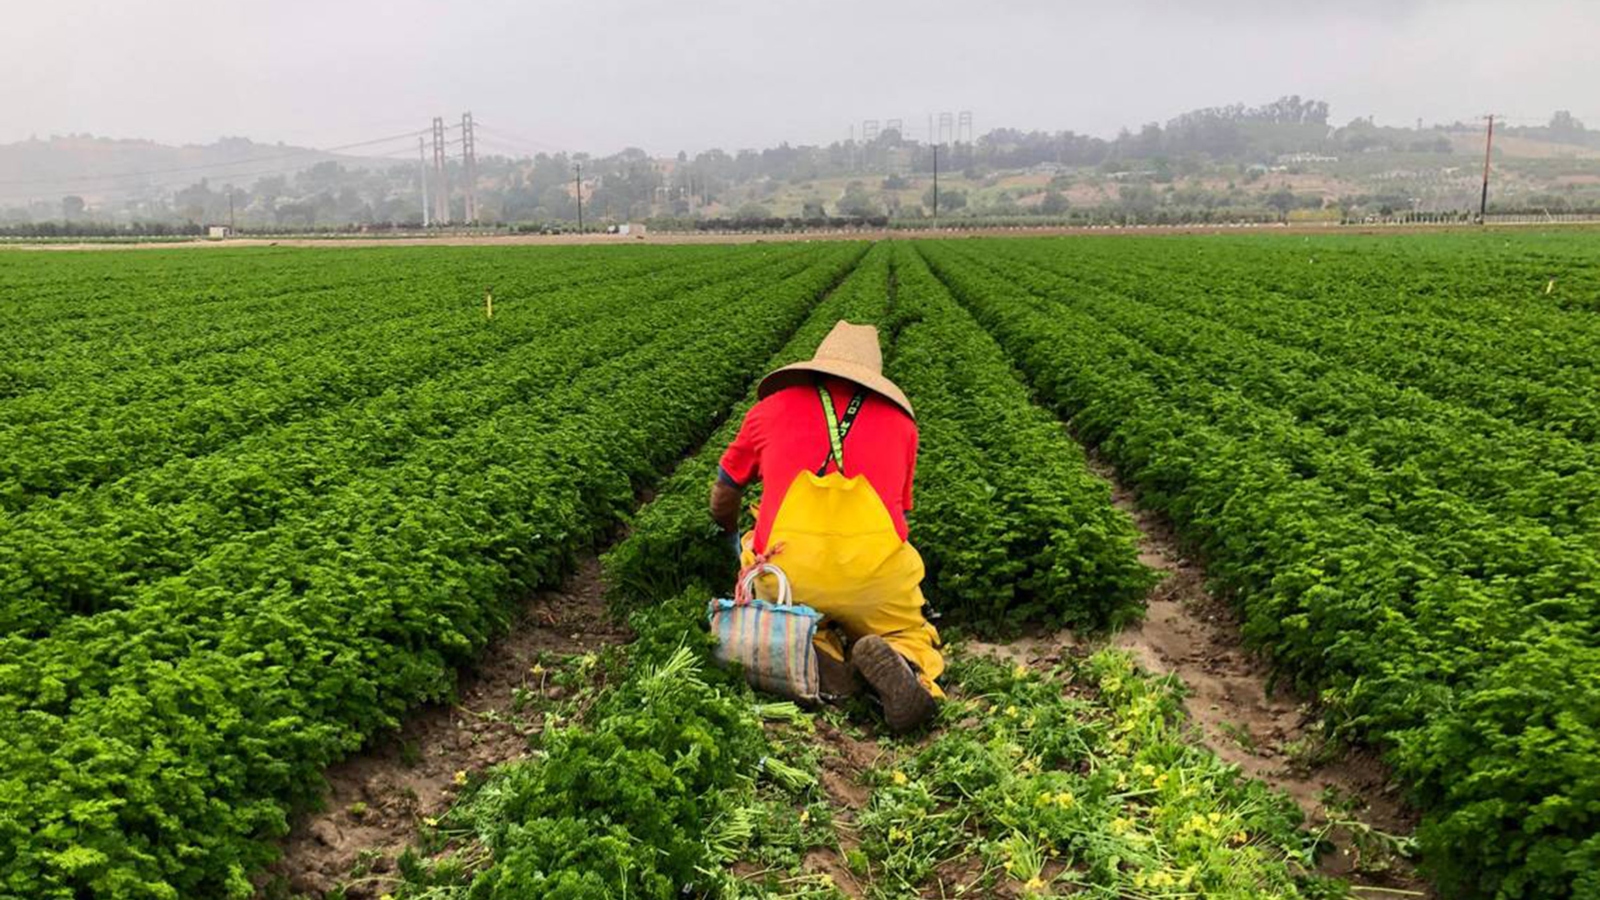 A farmworker in a field wearing a large tan hat, red top and yellow overalls is kneeling and picking greens in front of the smoggy horizon.